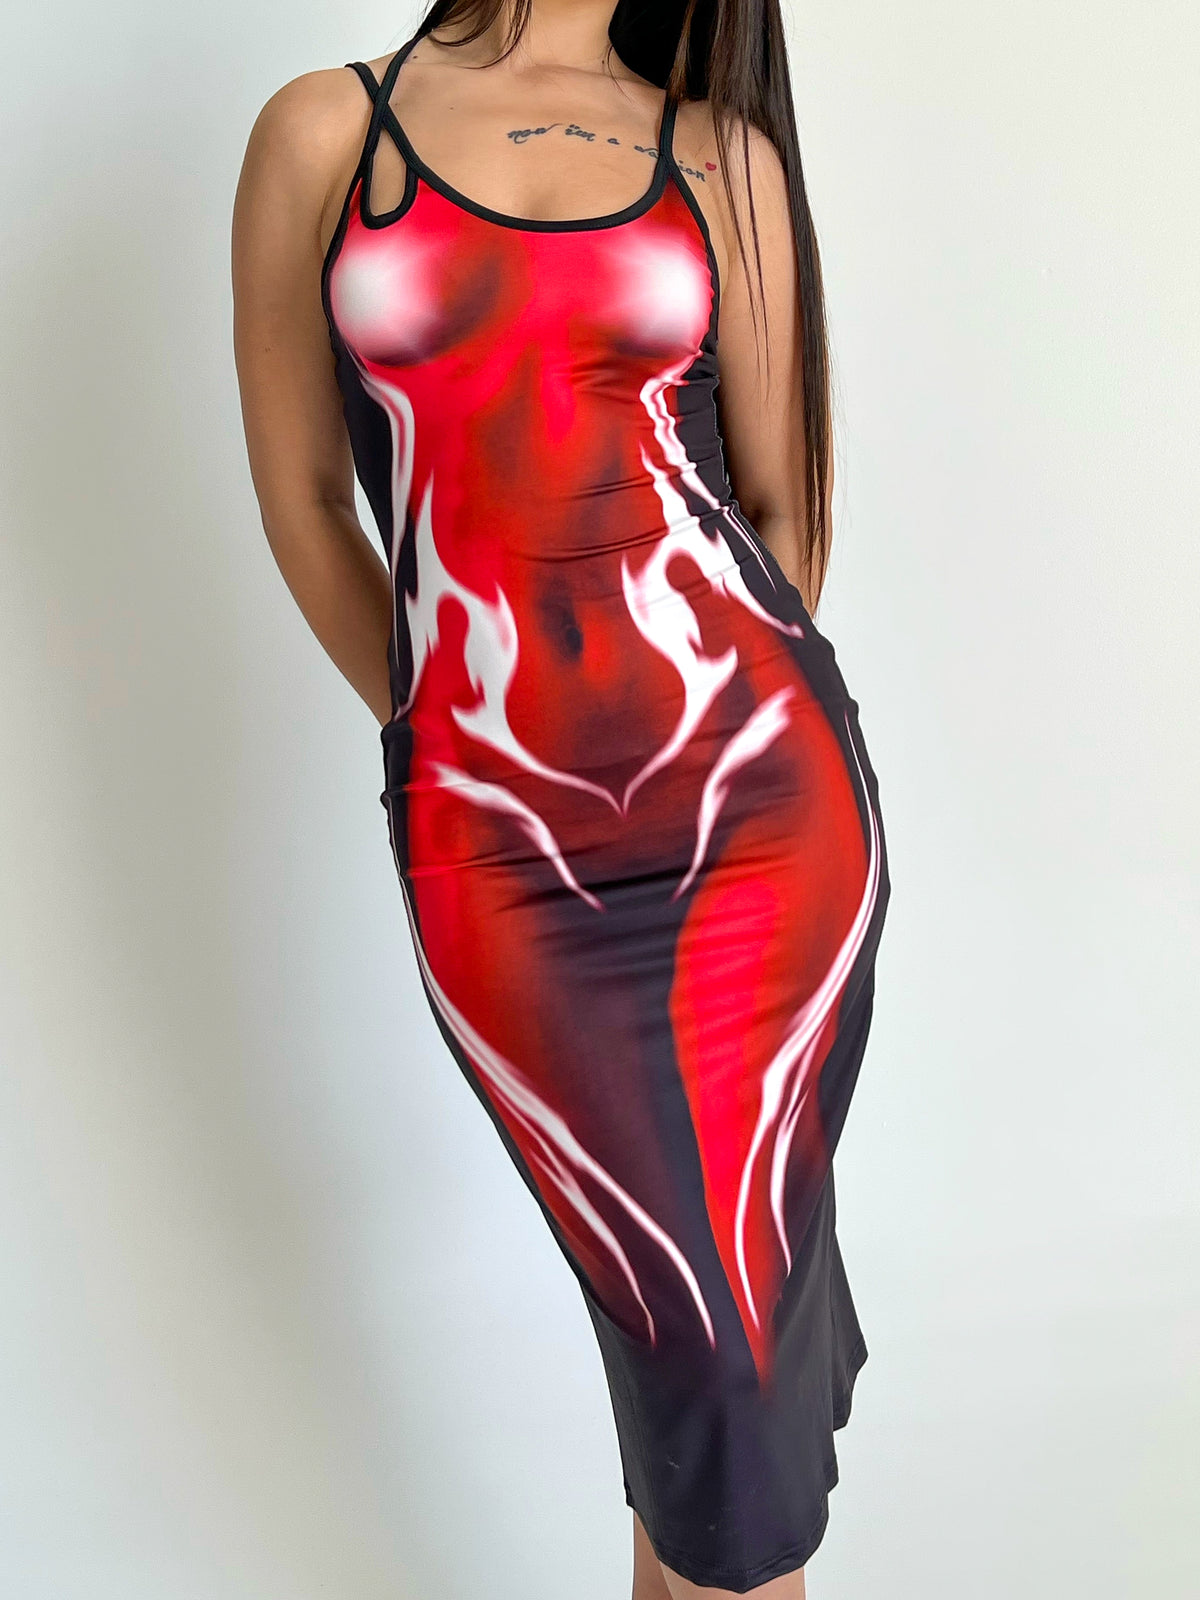 Lady Lucie Latex Plunge Bustier 